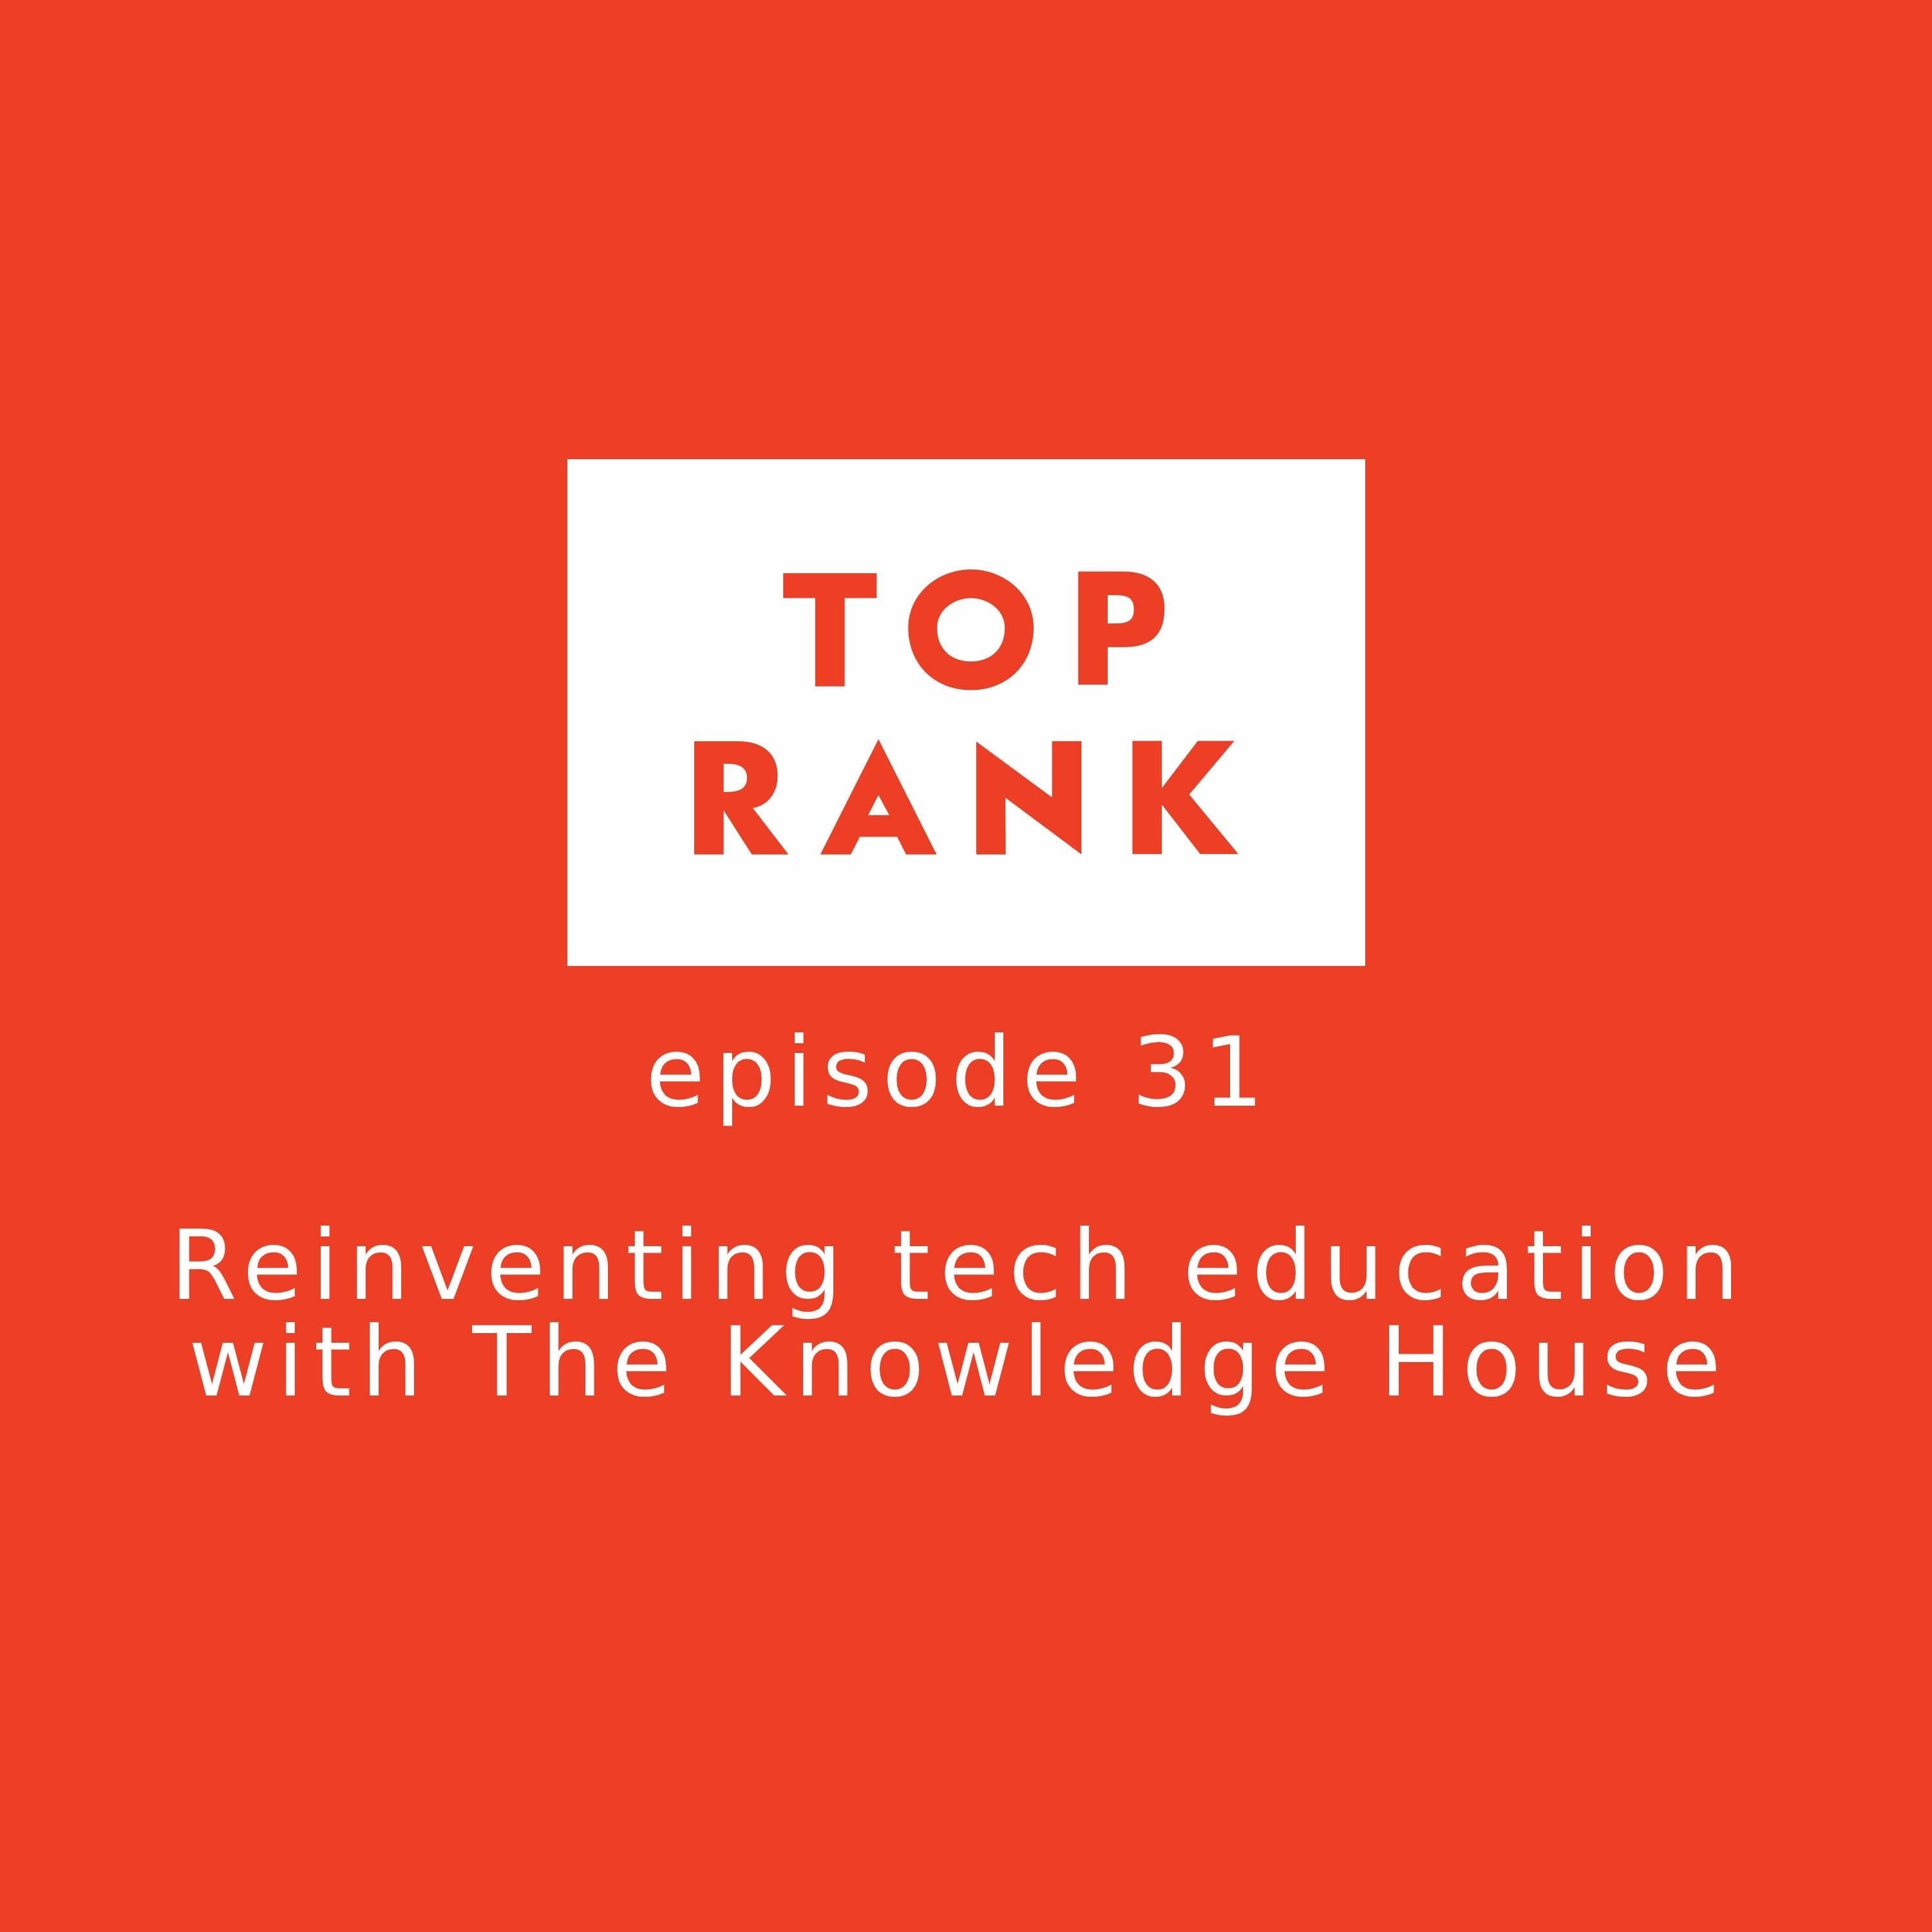 Episode 31: Reinventing tech education with The Knowledge House